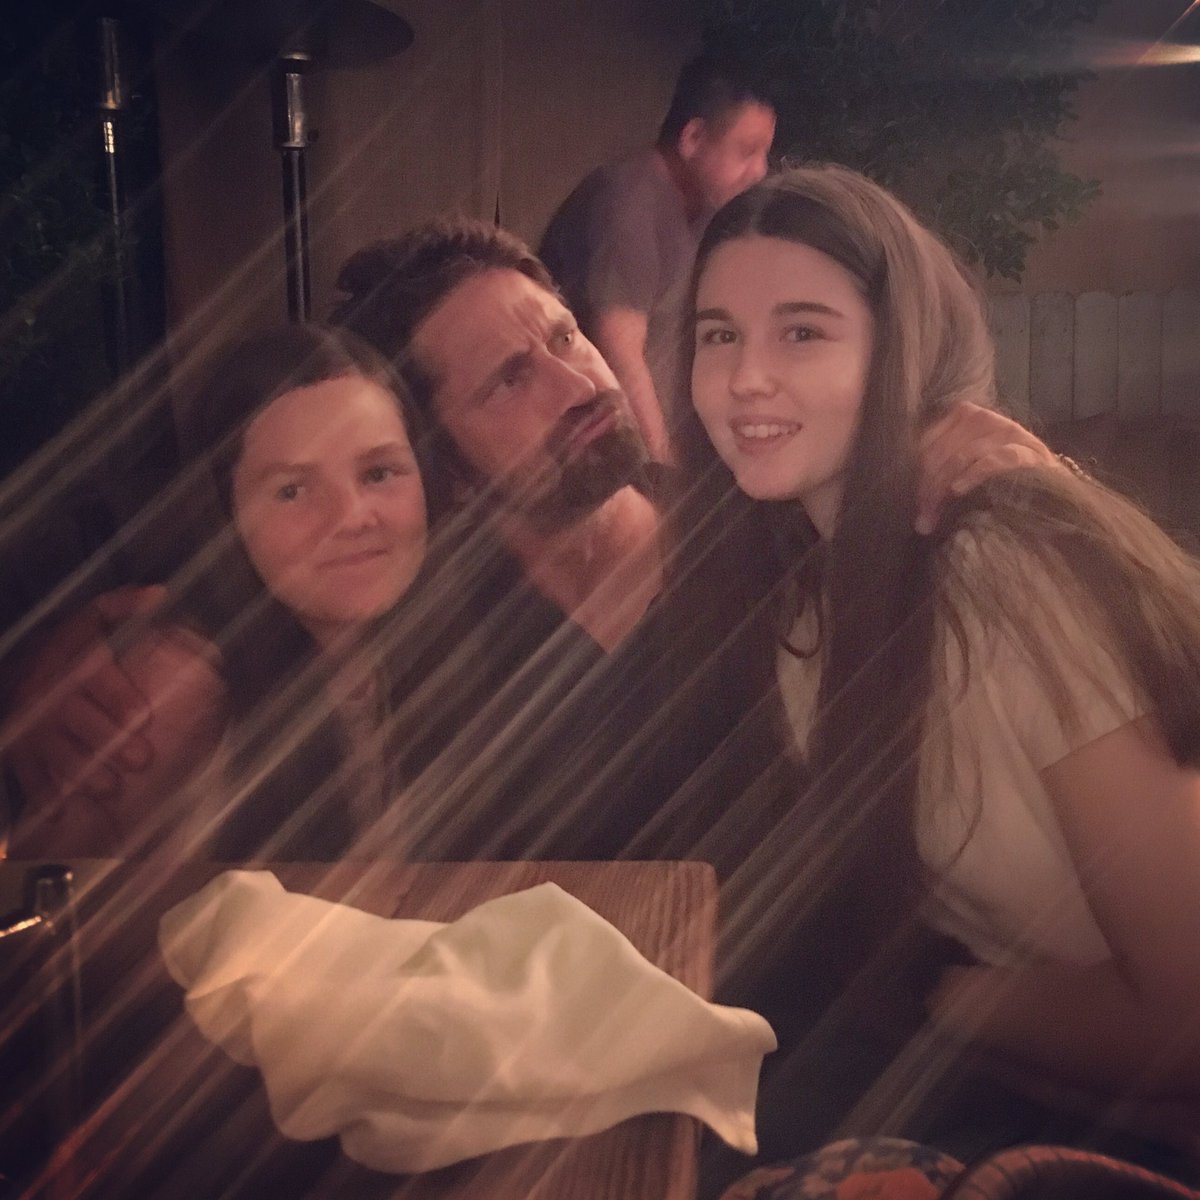 Most embarrassing uncle! Hanging with my nieces visiting from Scotland. Love ya girls! https://t.co/B7Ul0tyPSB